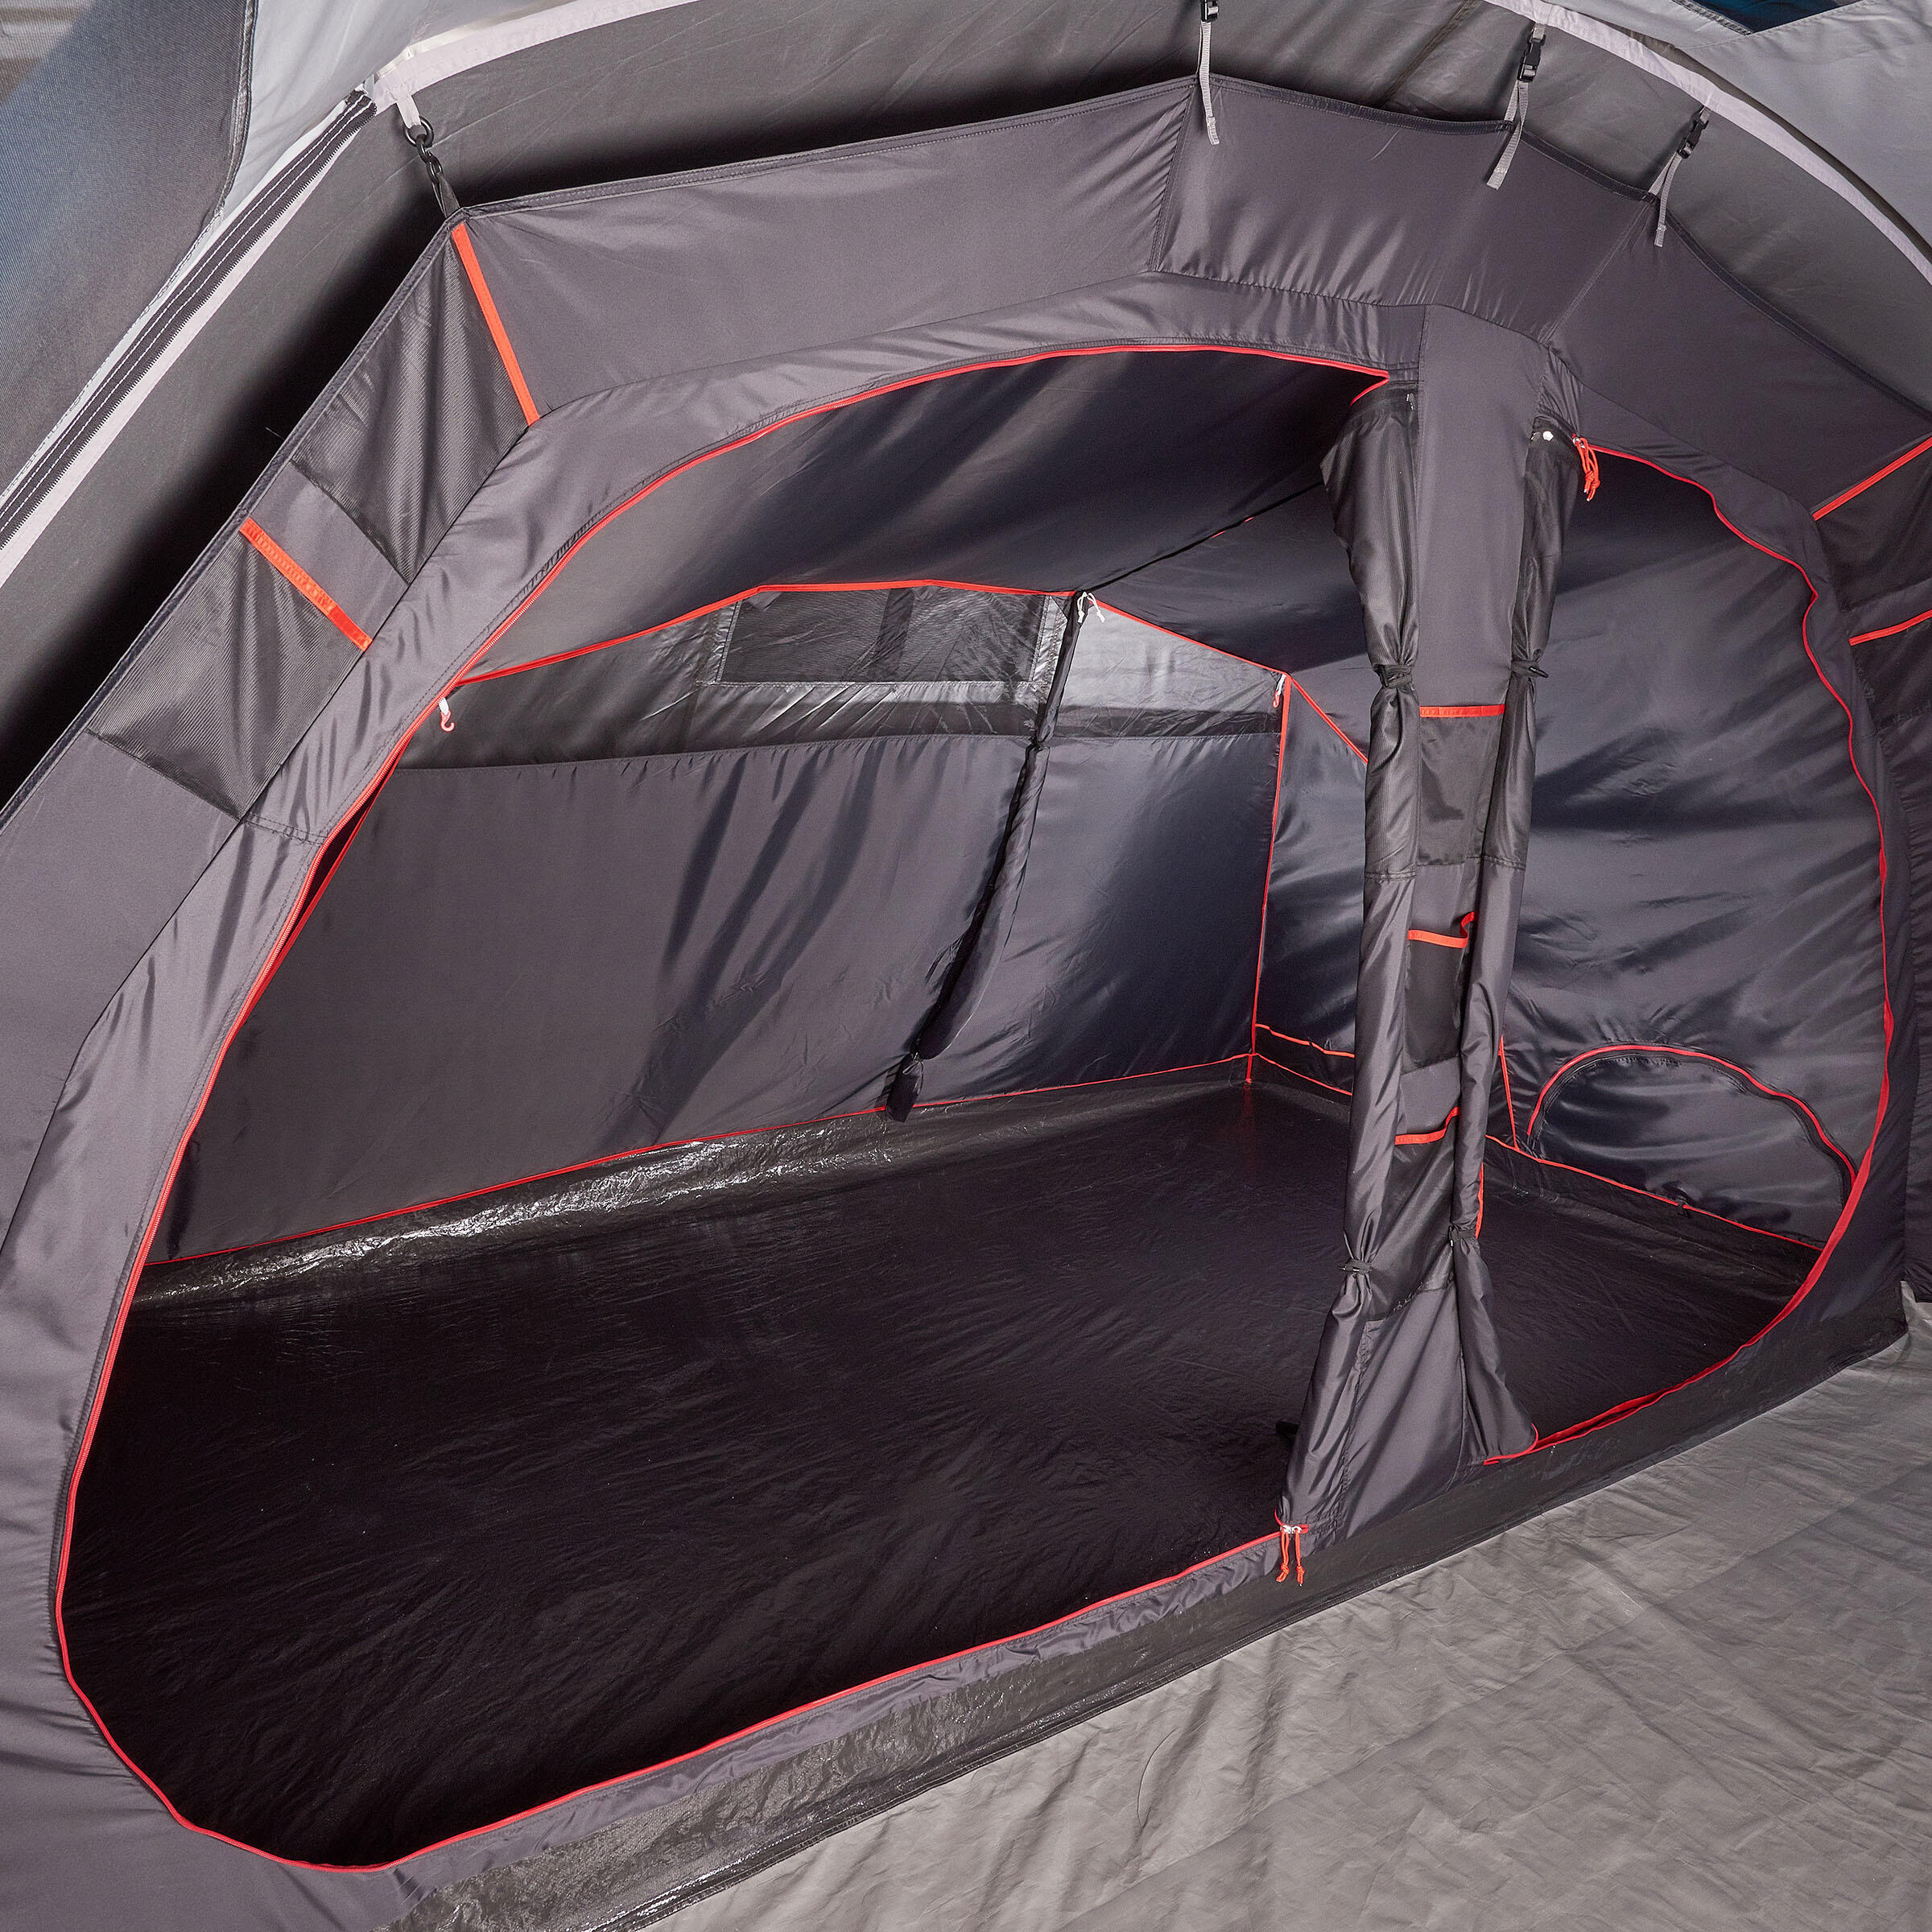 REFURBISHED BEDROOM AND GROUNDSHEET - SPARE PART AIR SECONDS 5.2 TENT-A GRADE 6/6